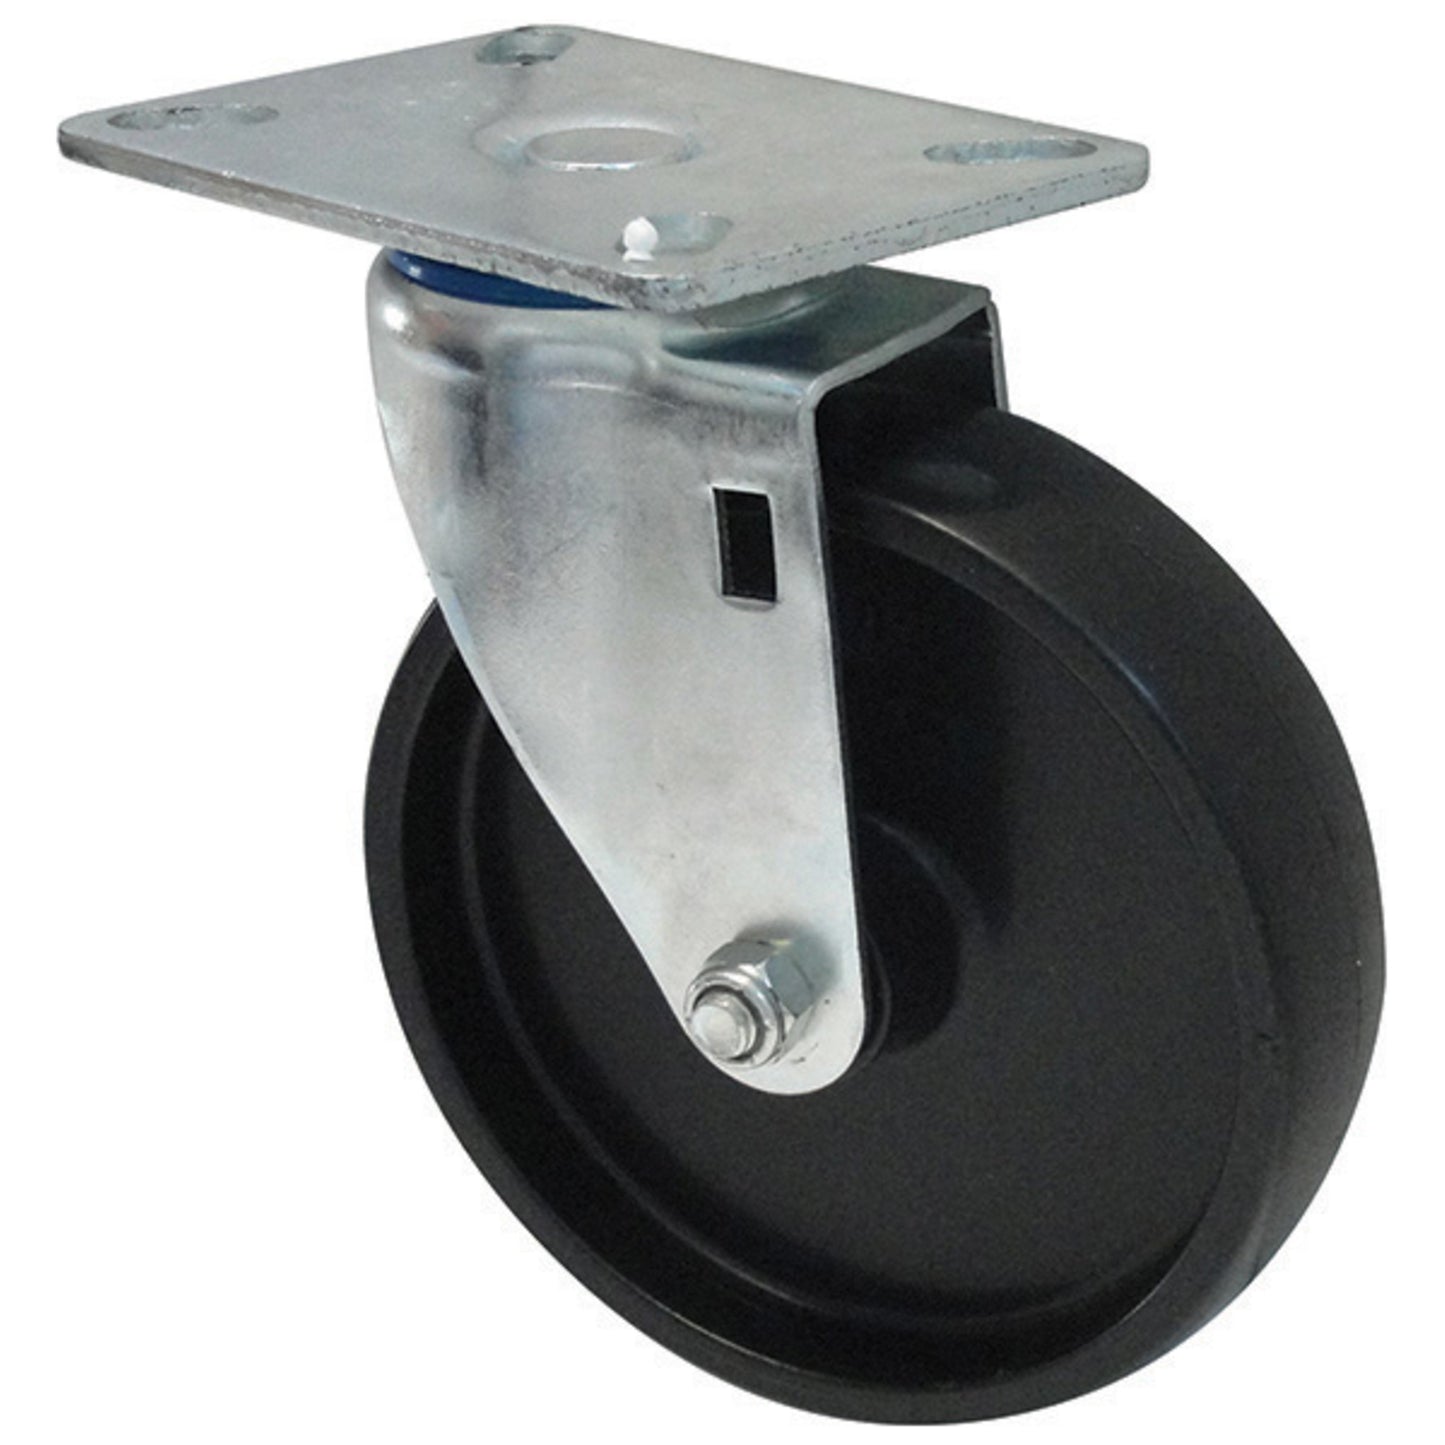 Caster with Mounting Plate for ALRK-3, Heavyweight